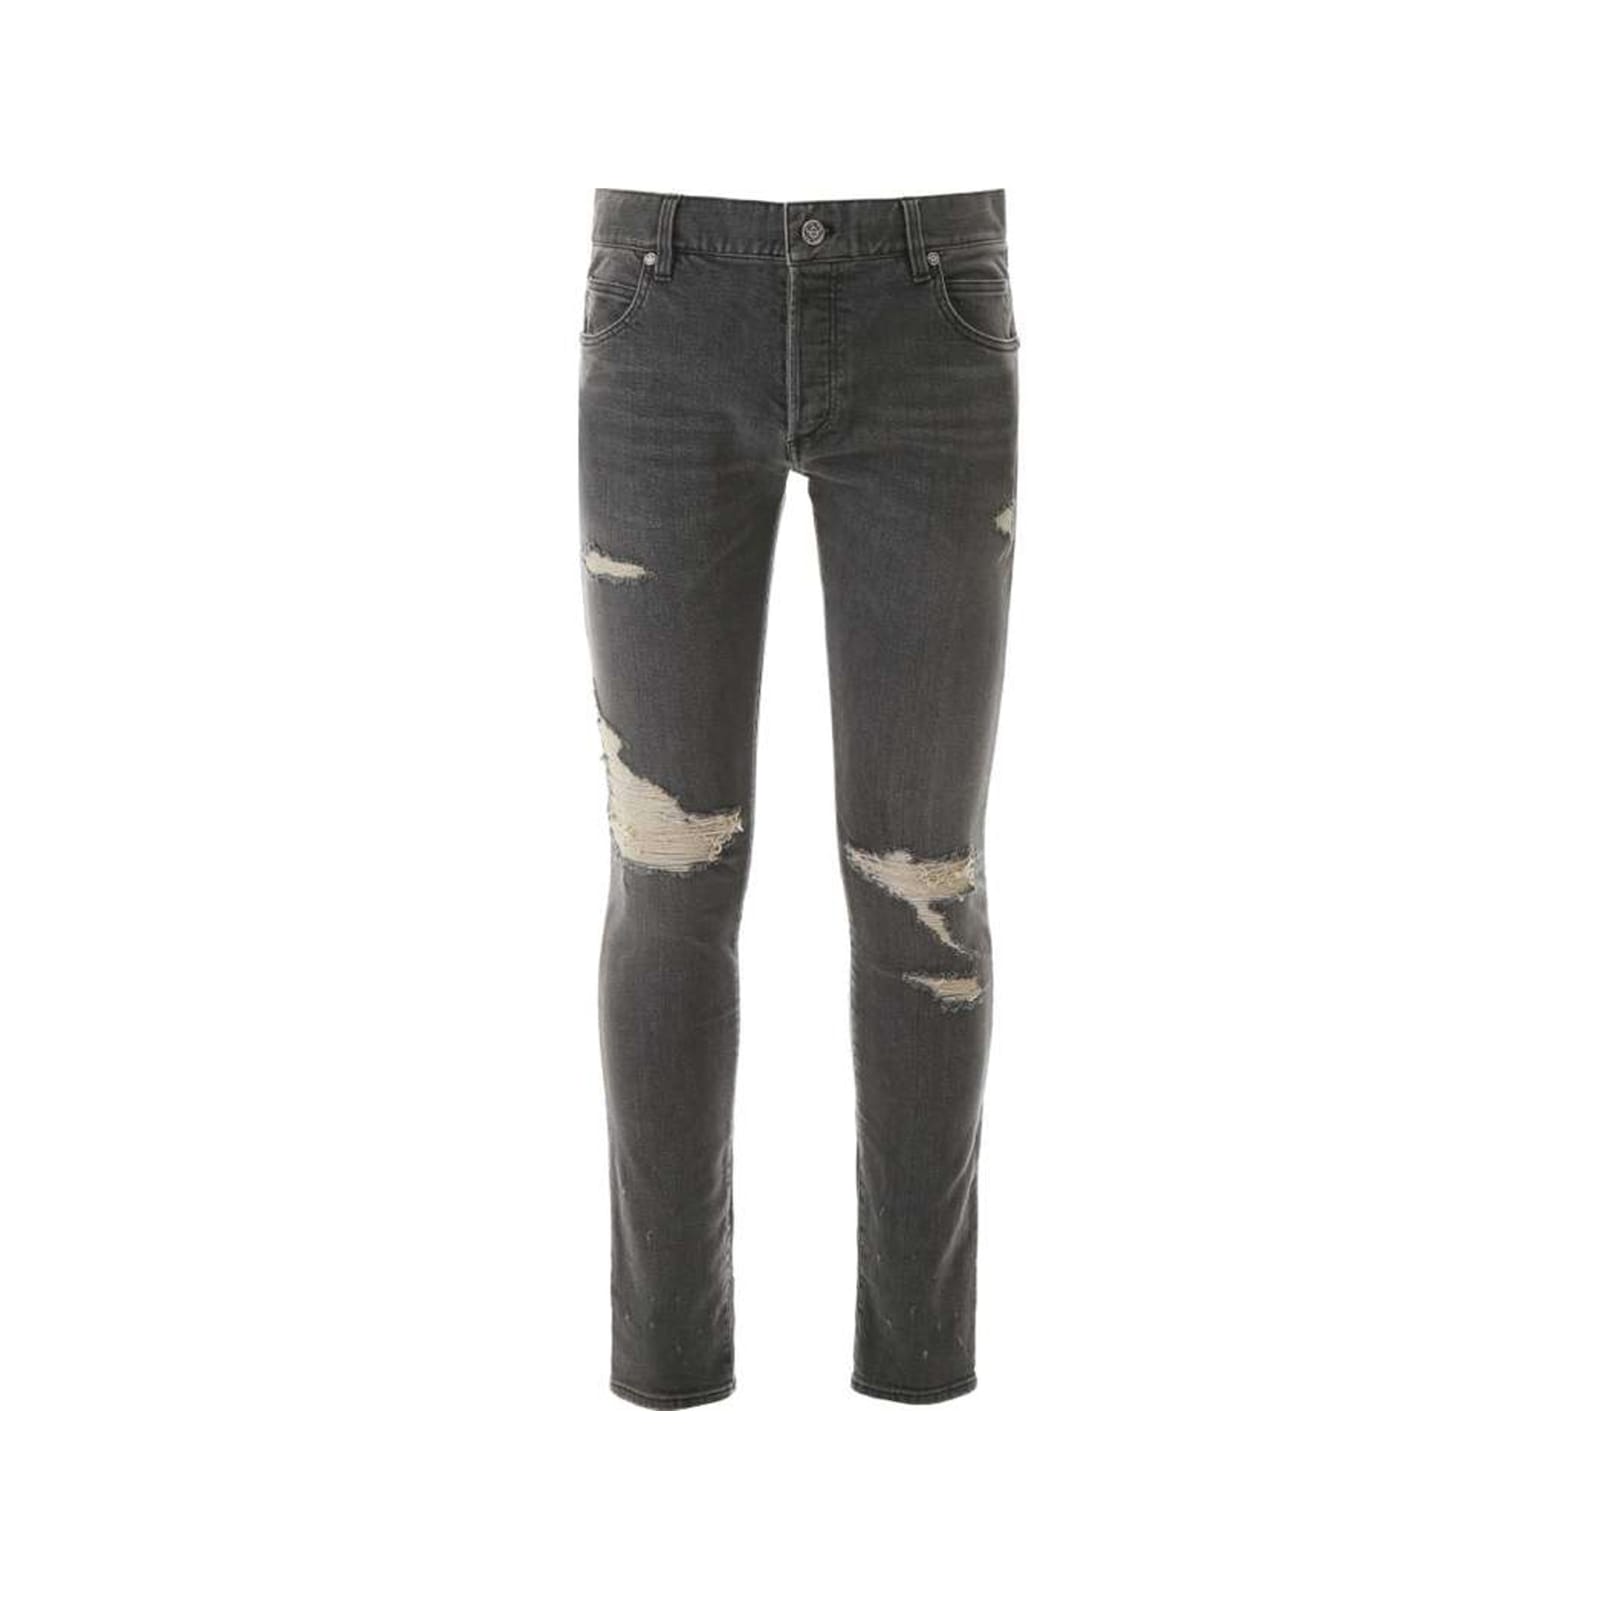 Men's Tapered Biker Jeans by Balmain | Coltorti Boutique